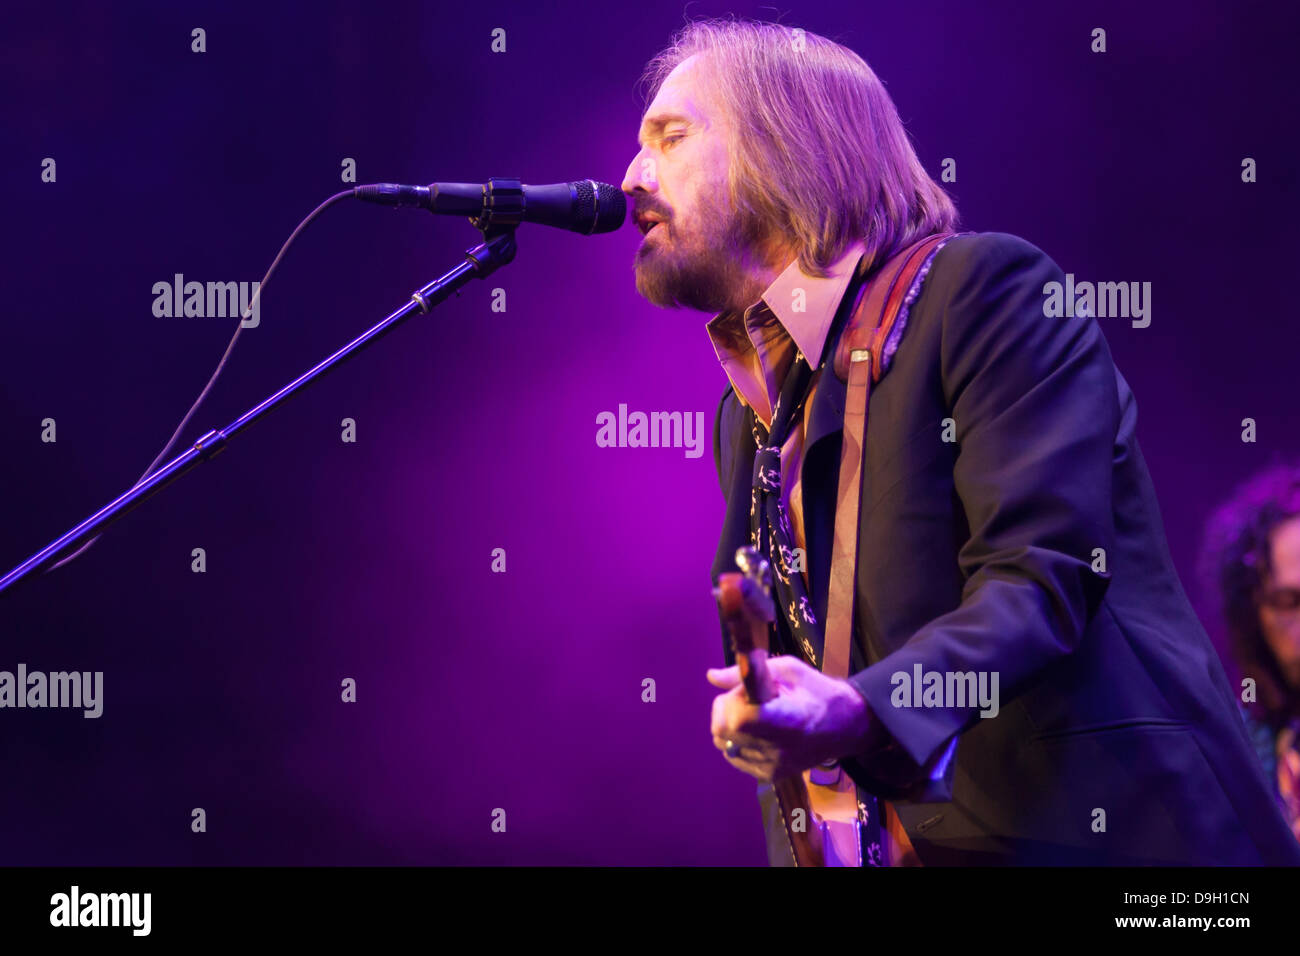 Tom Petty and The Heartbreakers perform at Budweiser Gardens in London Ontario, on June 18, 2013. The sold out concert was the only Canadian date on the bands 2013 concert tour. Stock Photo